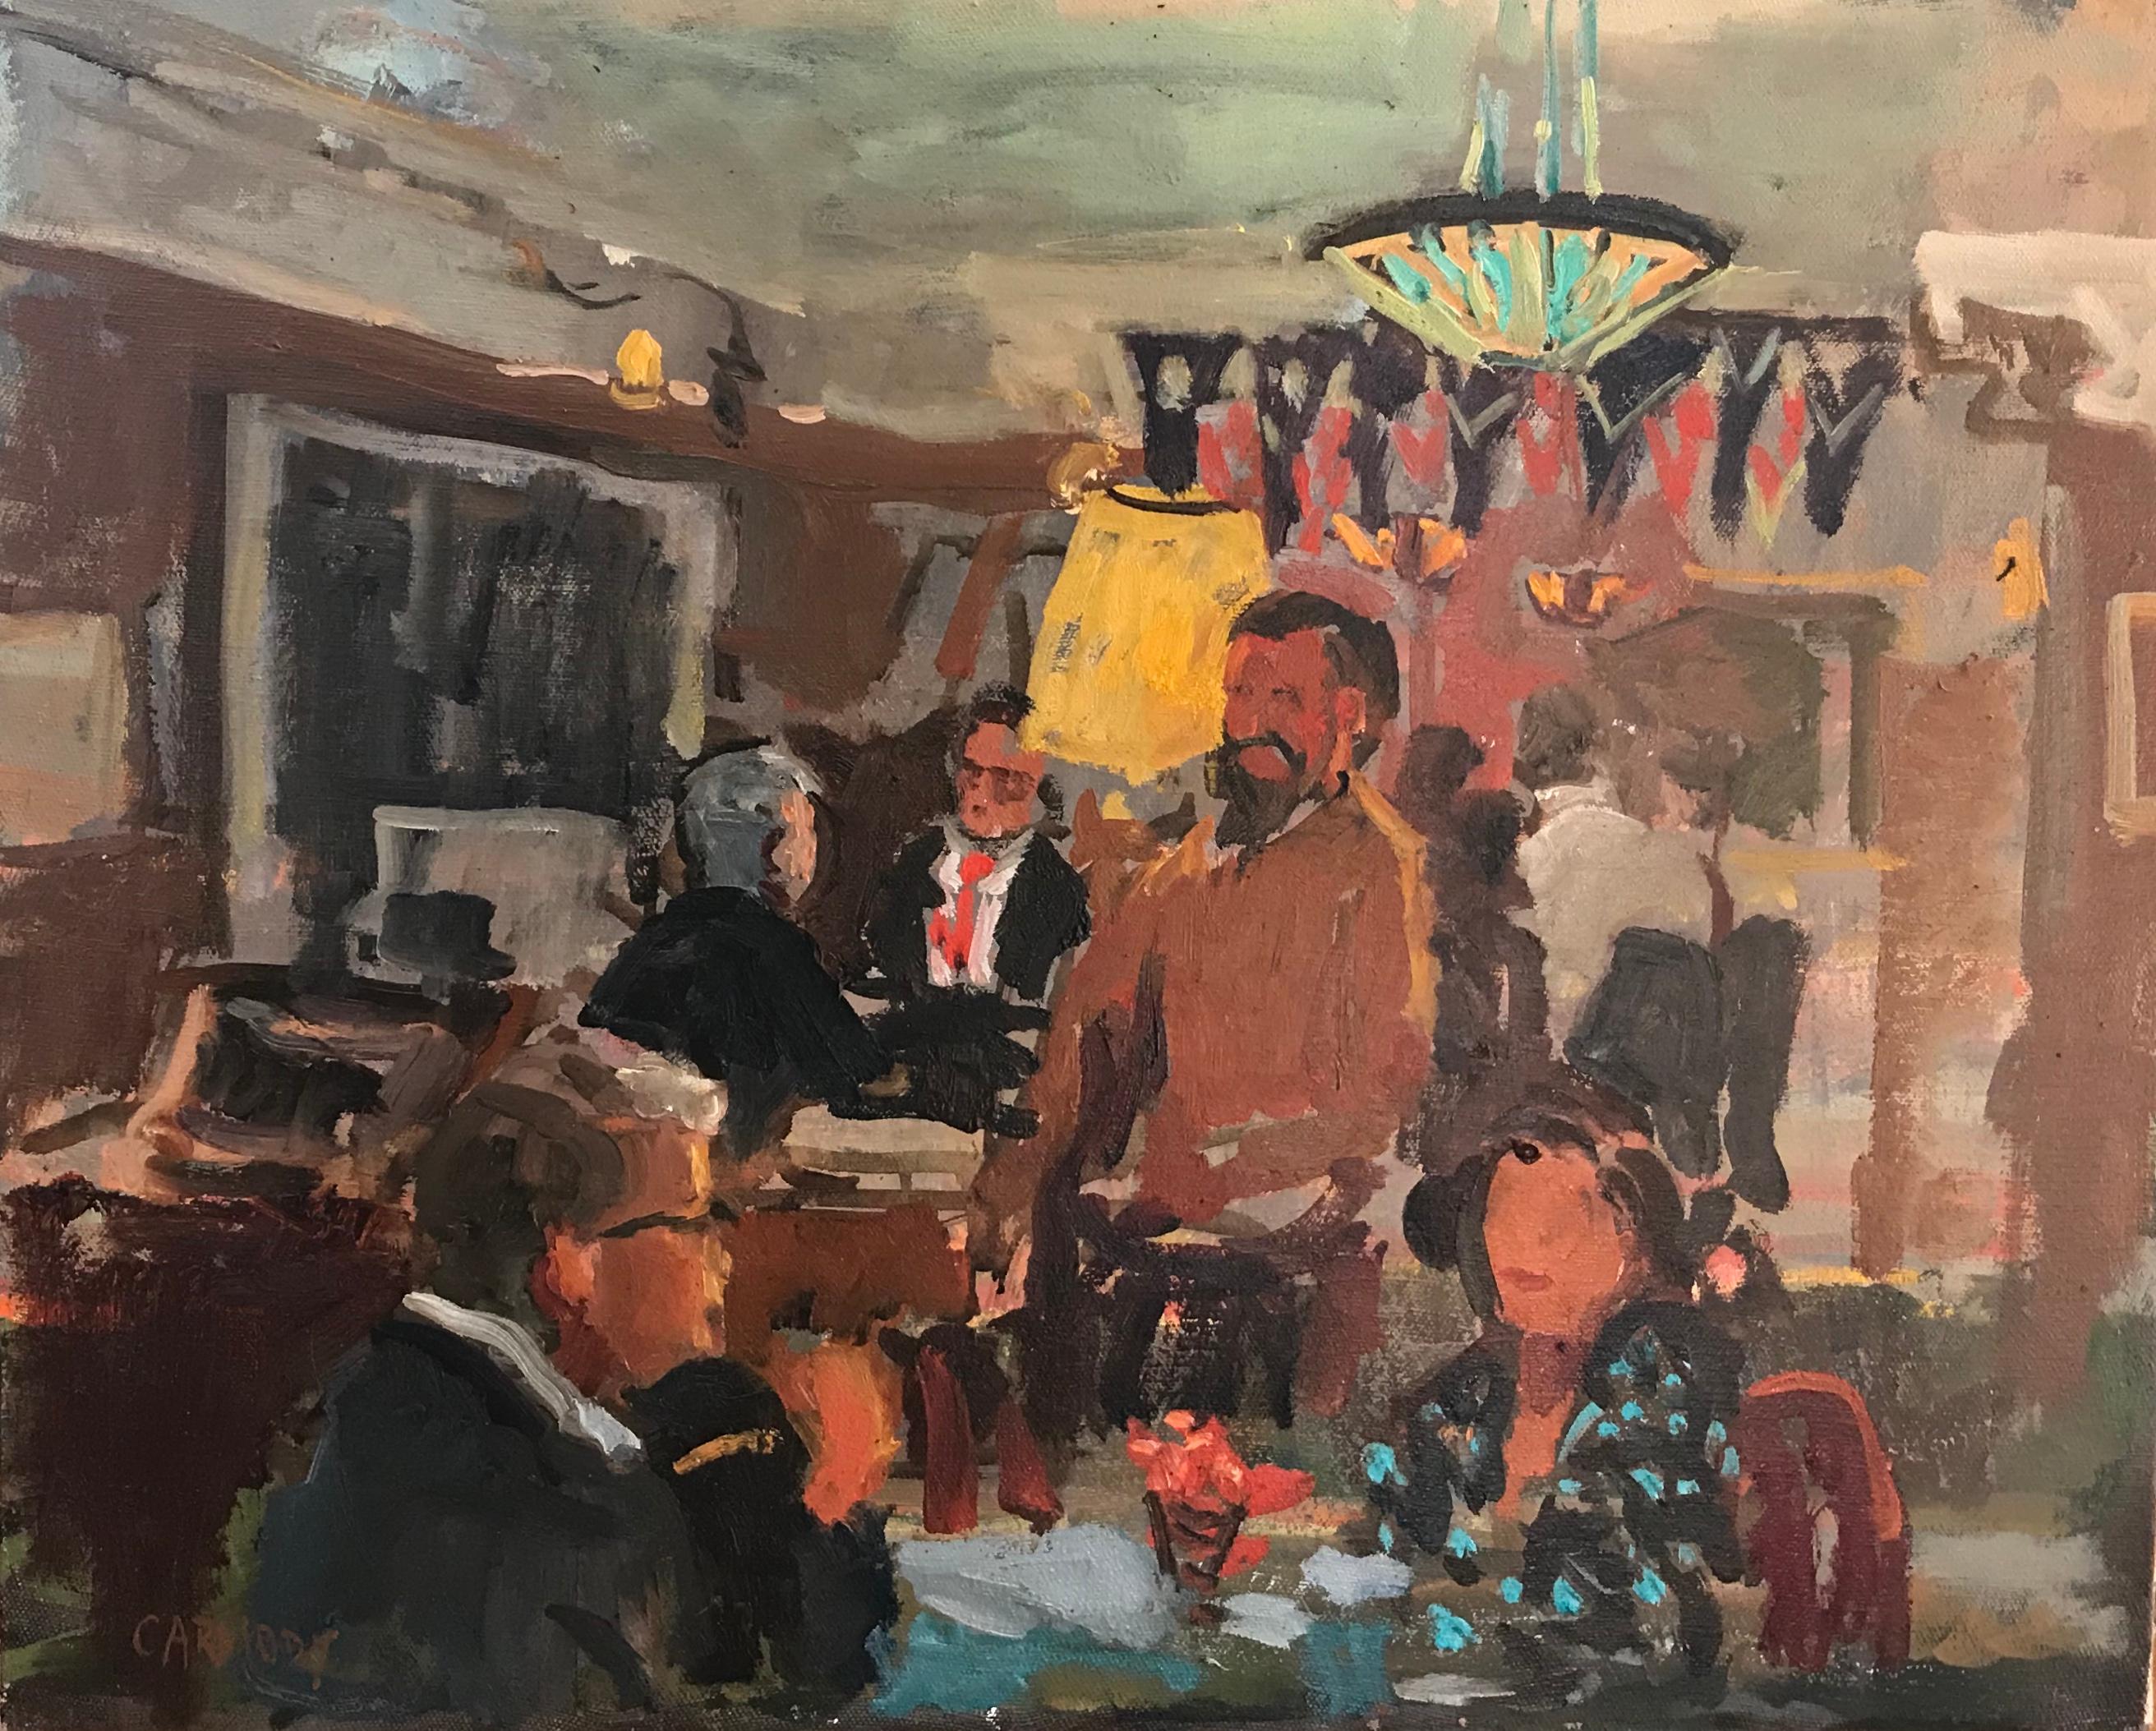 Kelly Carmody Figurative Painting - "Friday Night at the American Hotel" contemporary oil painting, dinner party fun